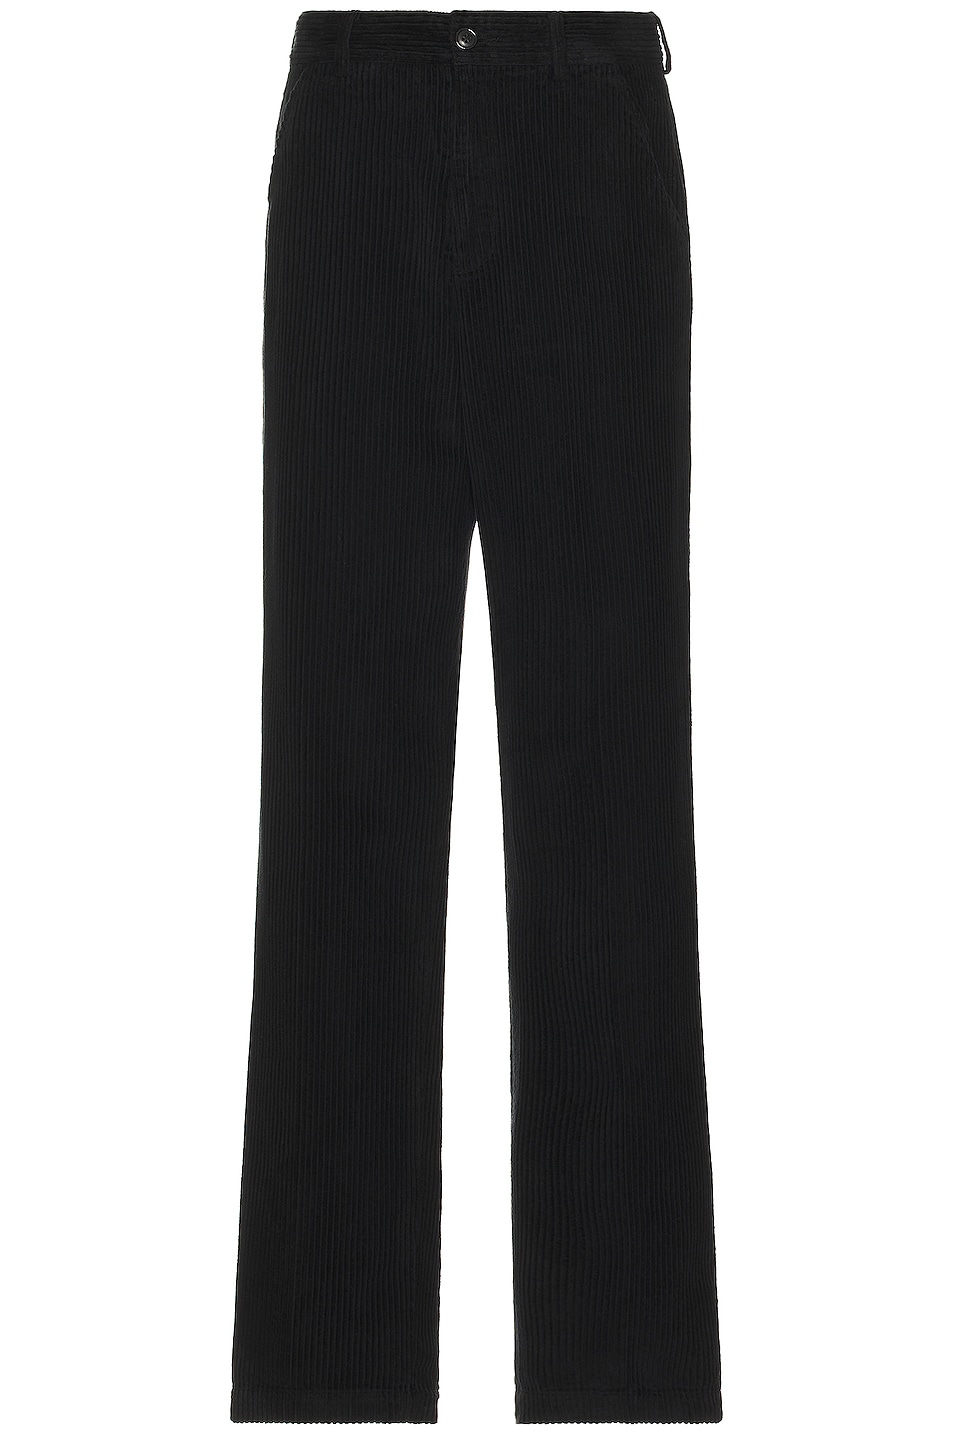 Image 1 of Our Legacy Chino in Black Corduroy